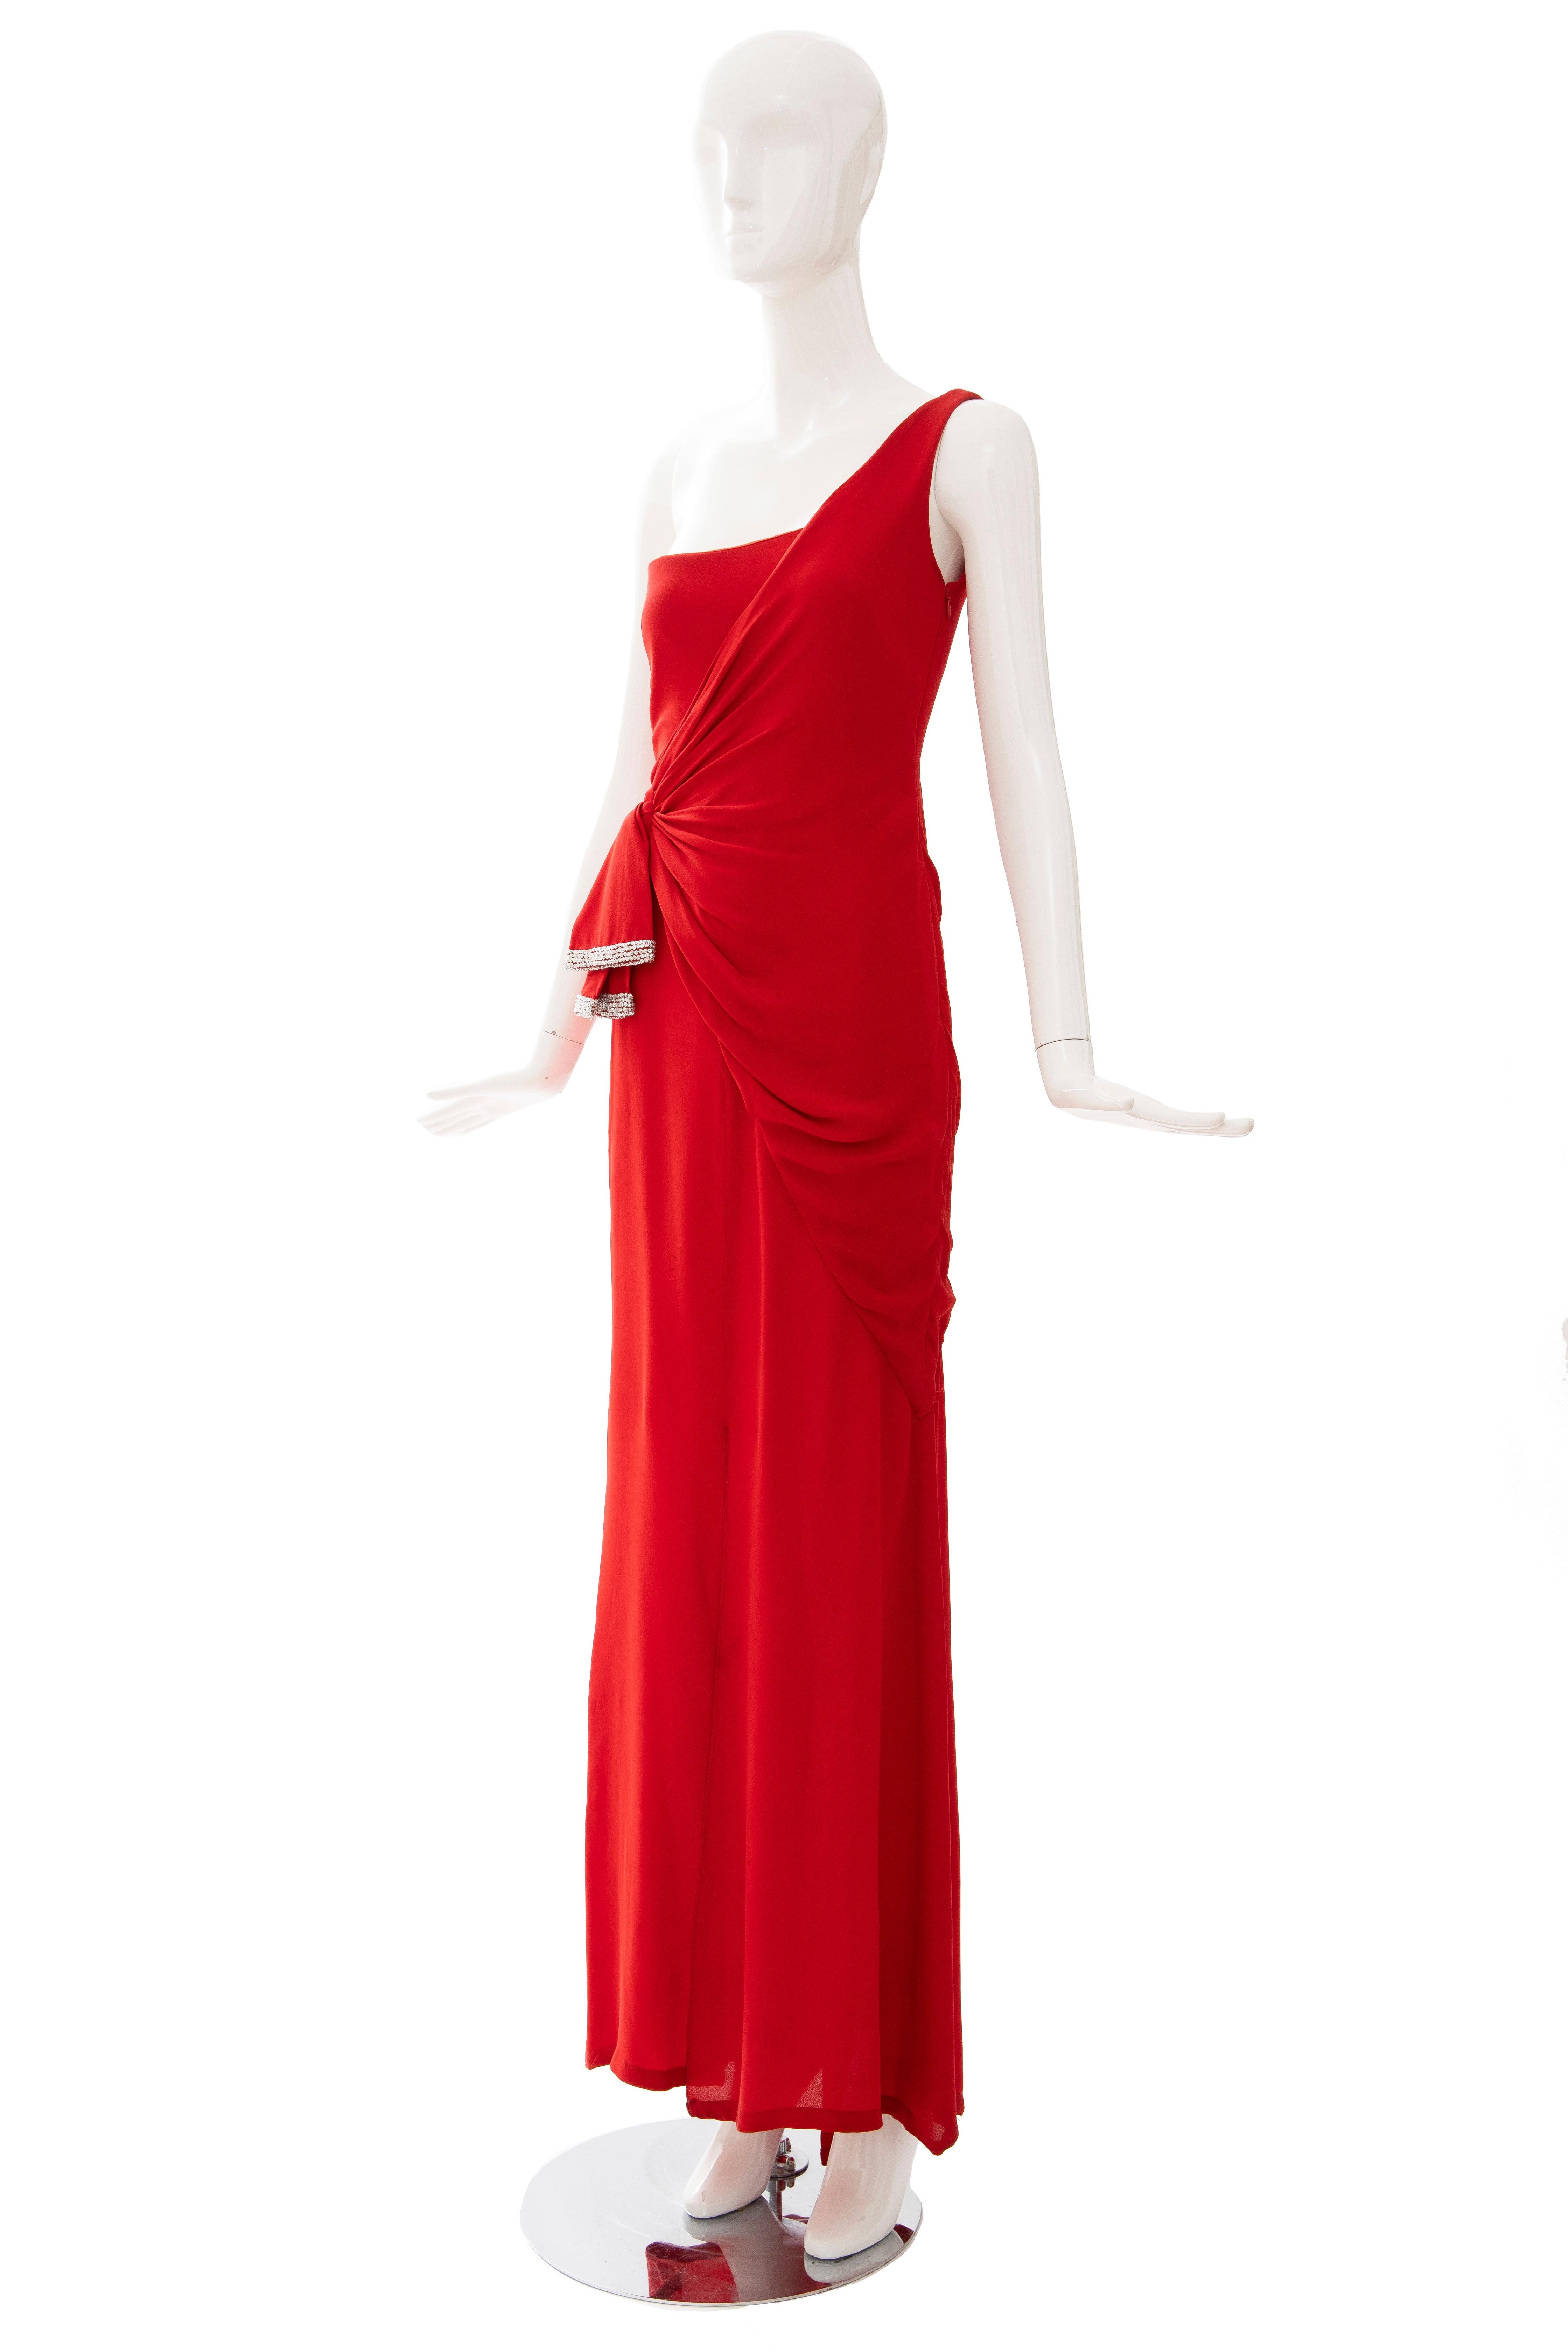 Valentino Runway Red Silk Crepe Evening Dress (Final Collection), Spring 2008 For Sale 8